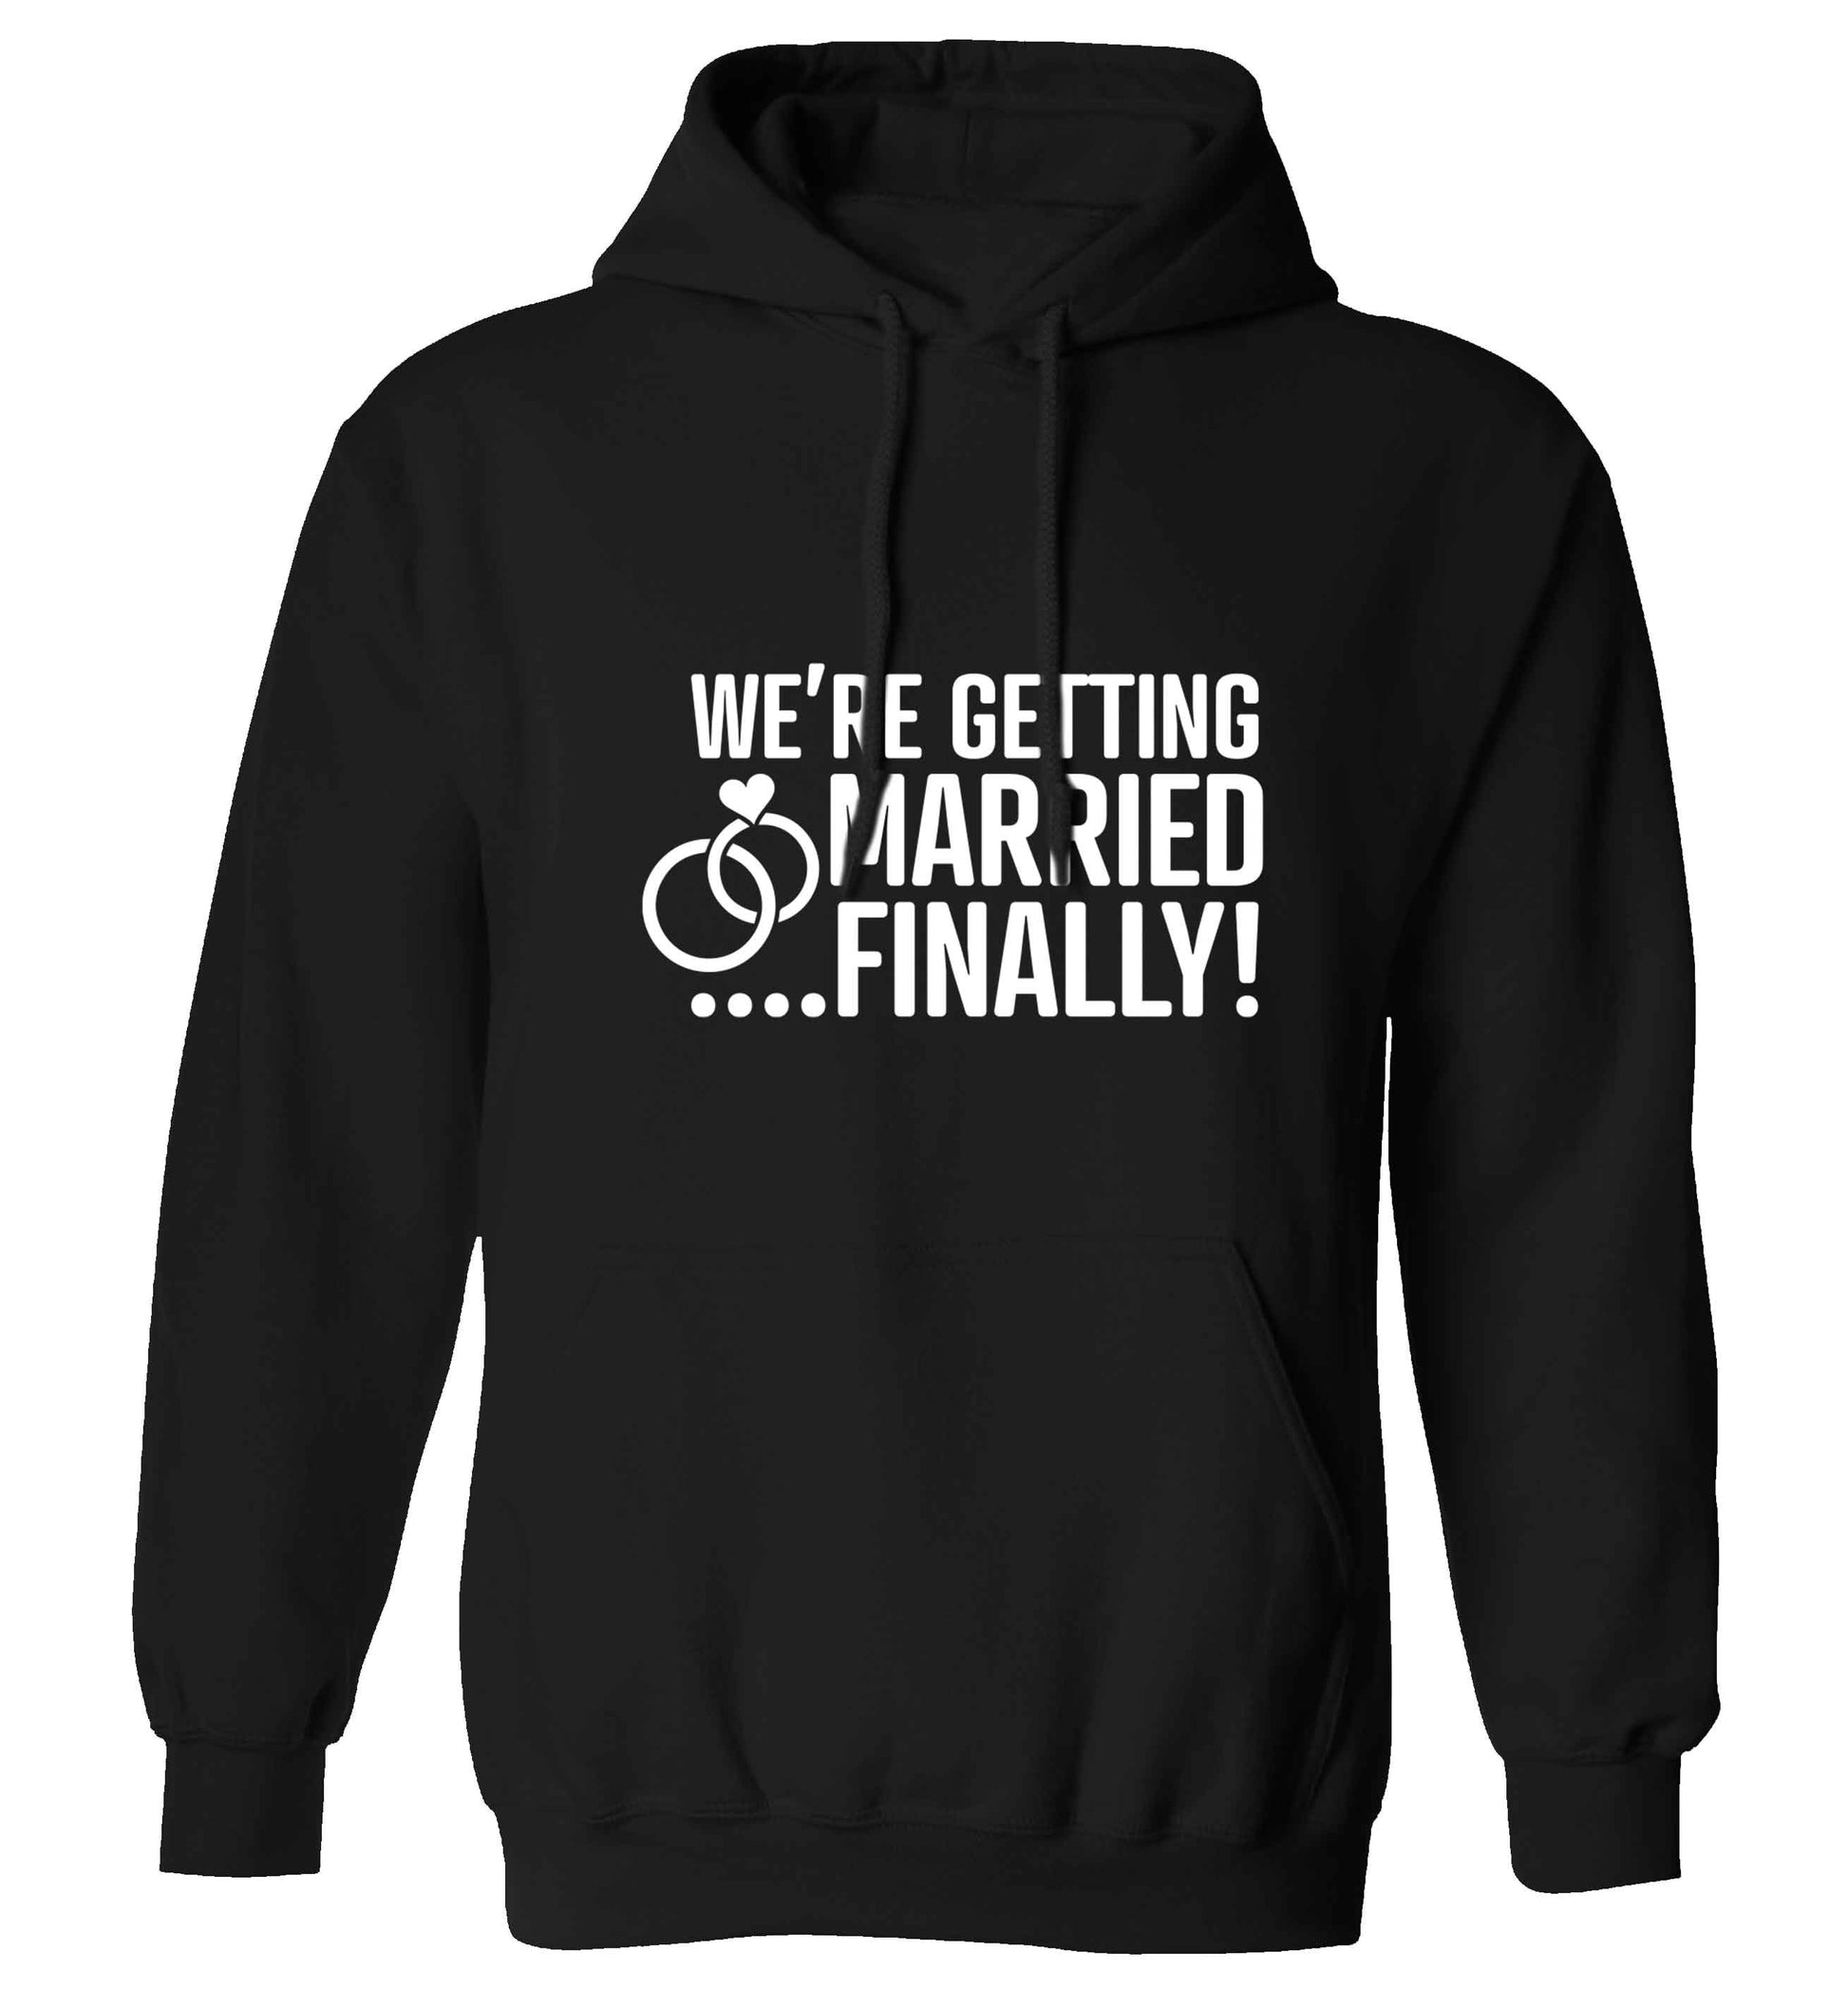 It's been a long wait but it's finally happening! Let everyone know you're celebrating your big day soon! adults unisex black hoodie 2XL